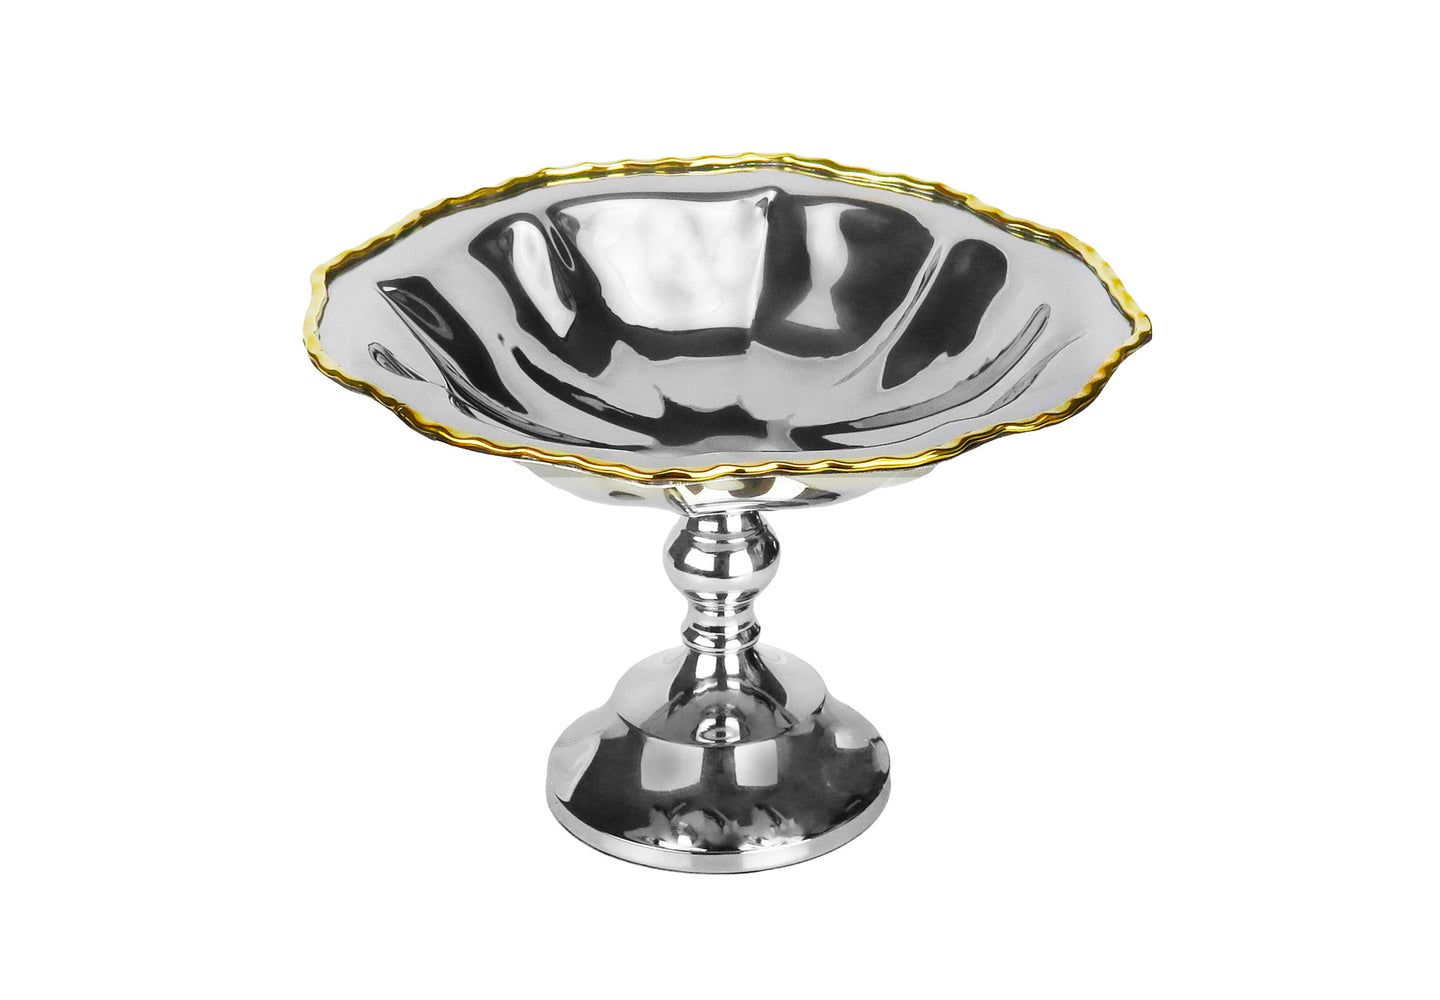 Centerpiece Footed Bowl with Gold Border